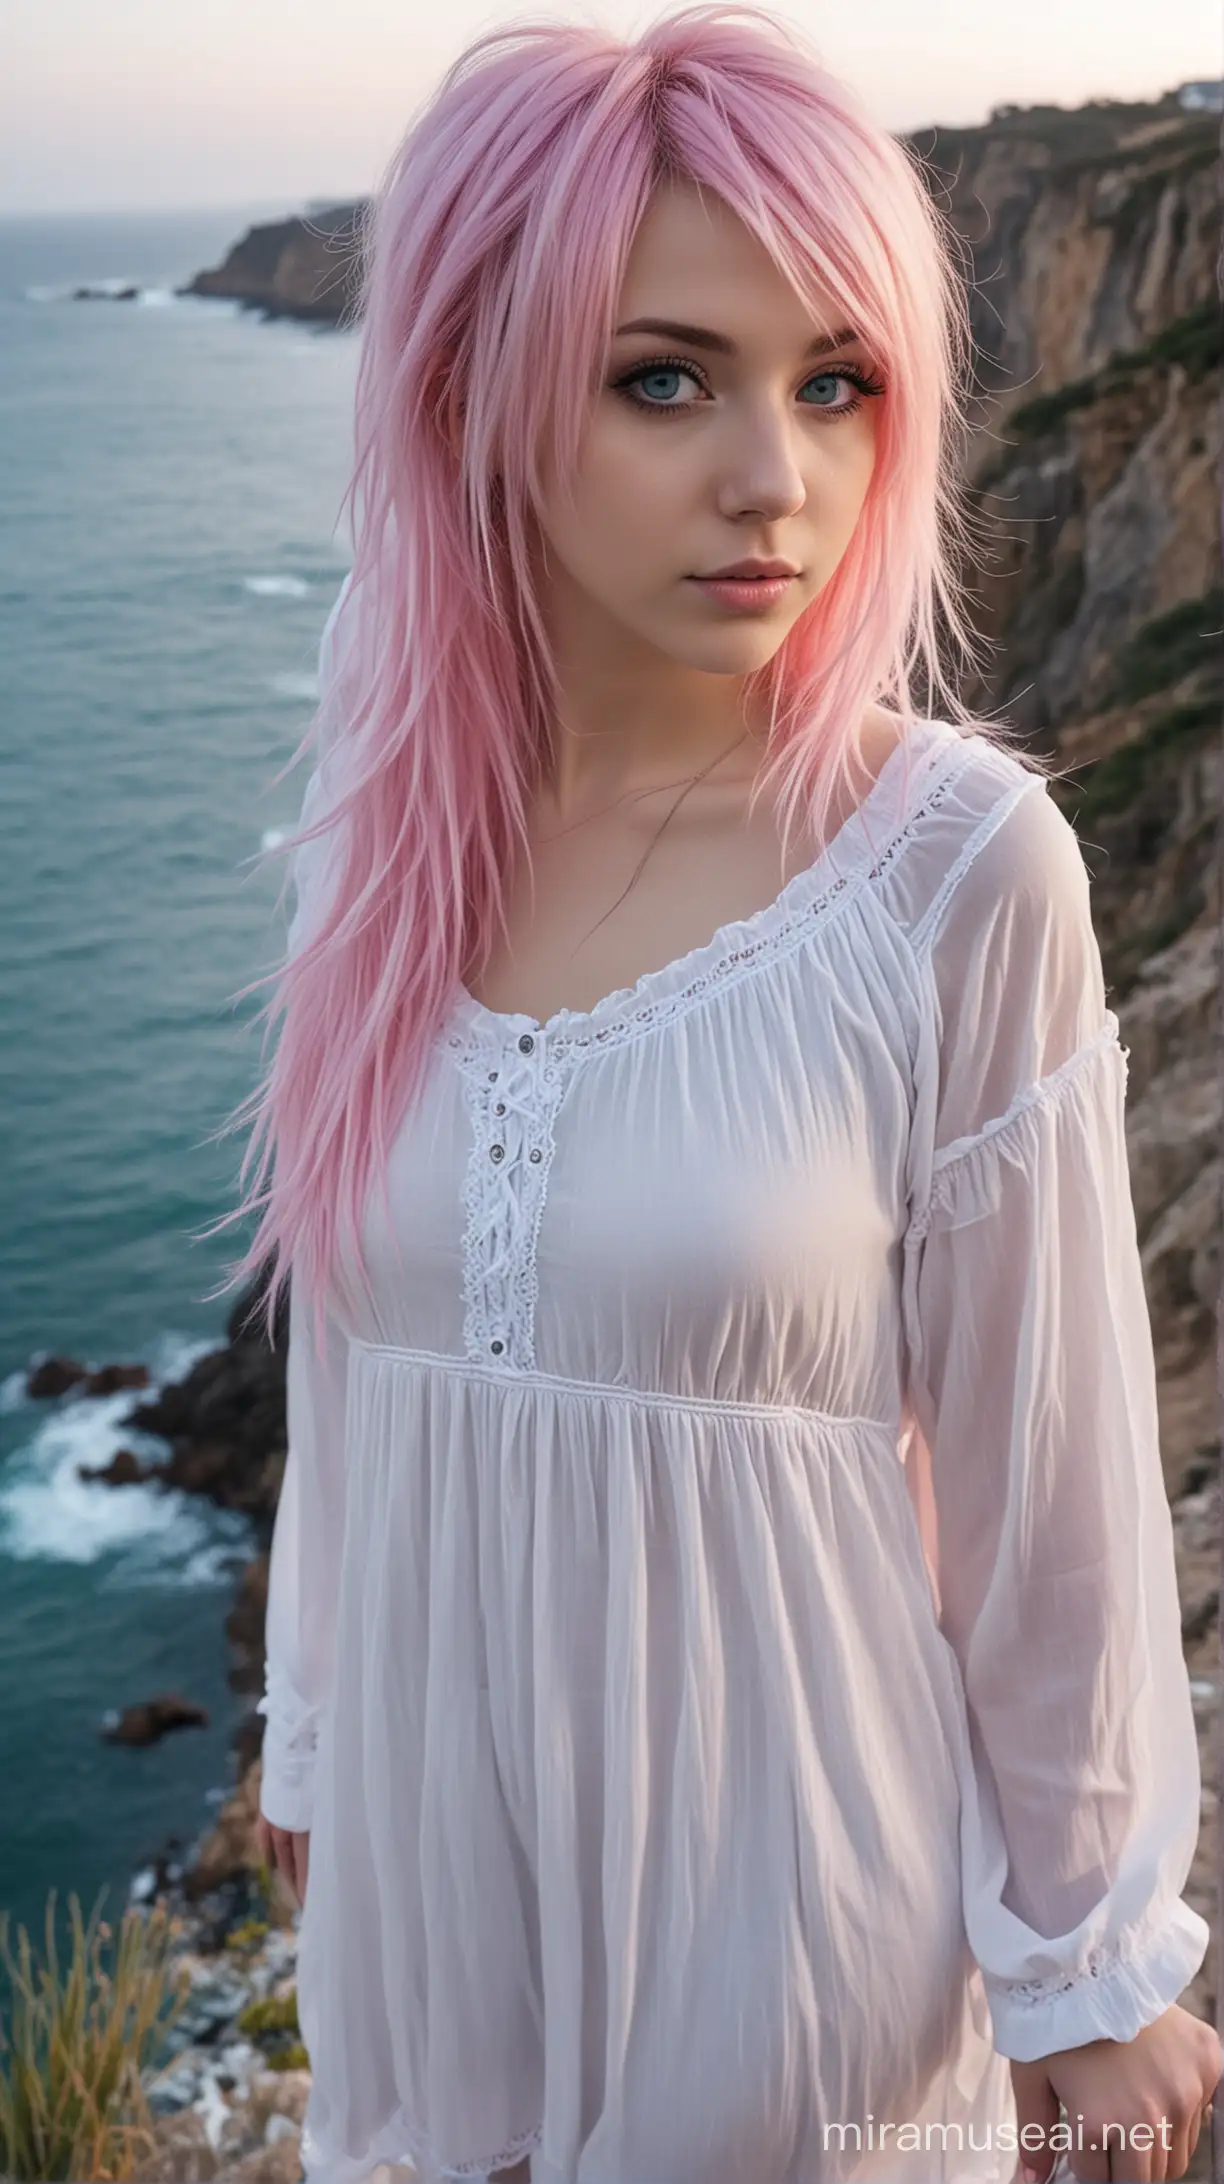 Cute and adorable 22 years old emo girl with long pink and white emo hairstyle, absolutely gorgeous , blue eyes, white soft skin, wearing white nightdress, outside in the night and on the edge of a cliff above the sea"